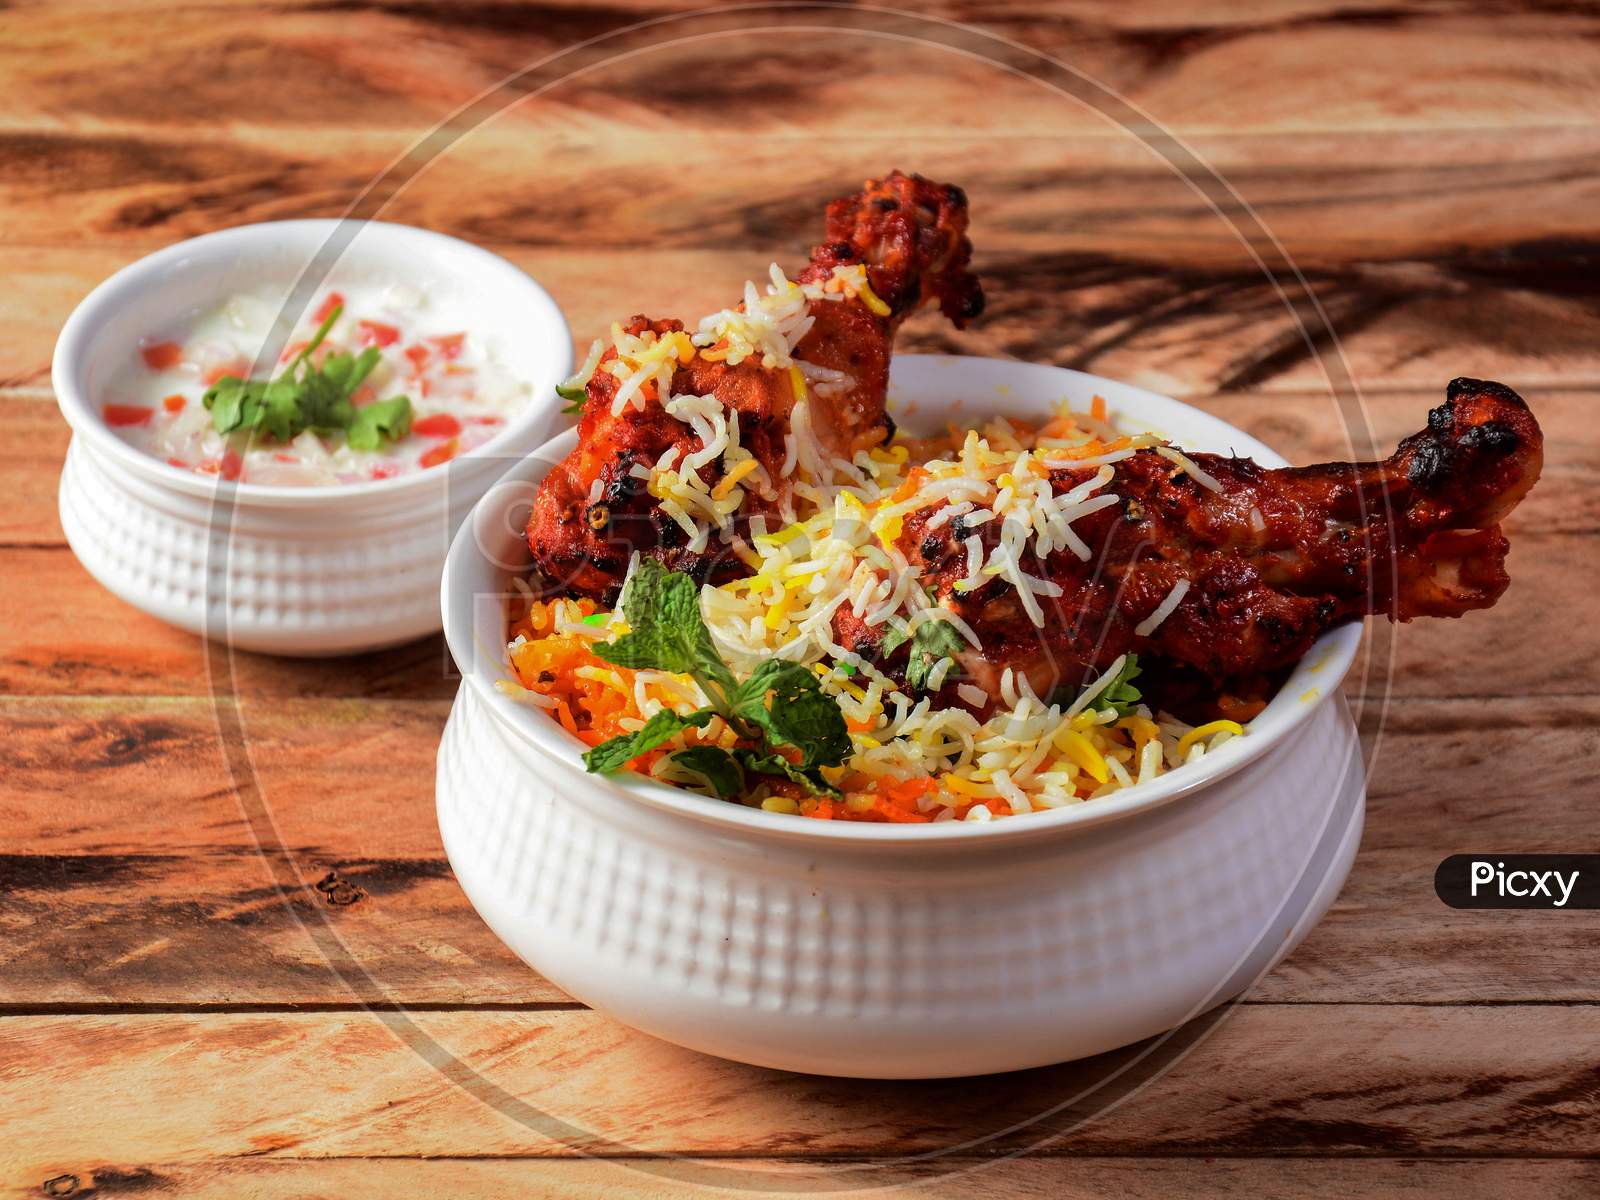 Chicken Tikka Biryani Made Of Basmati Rice Cooked With Masala Spices, Served With Yogurt, Selective Focus